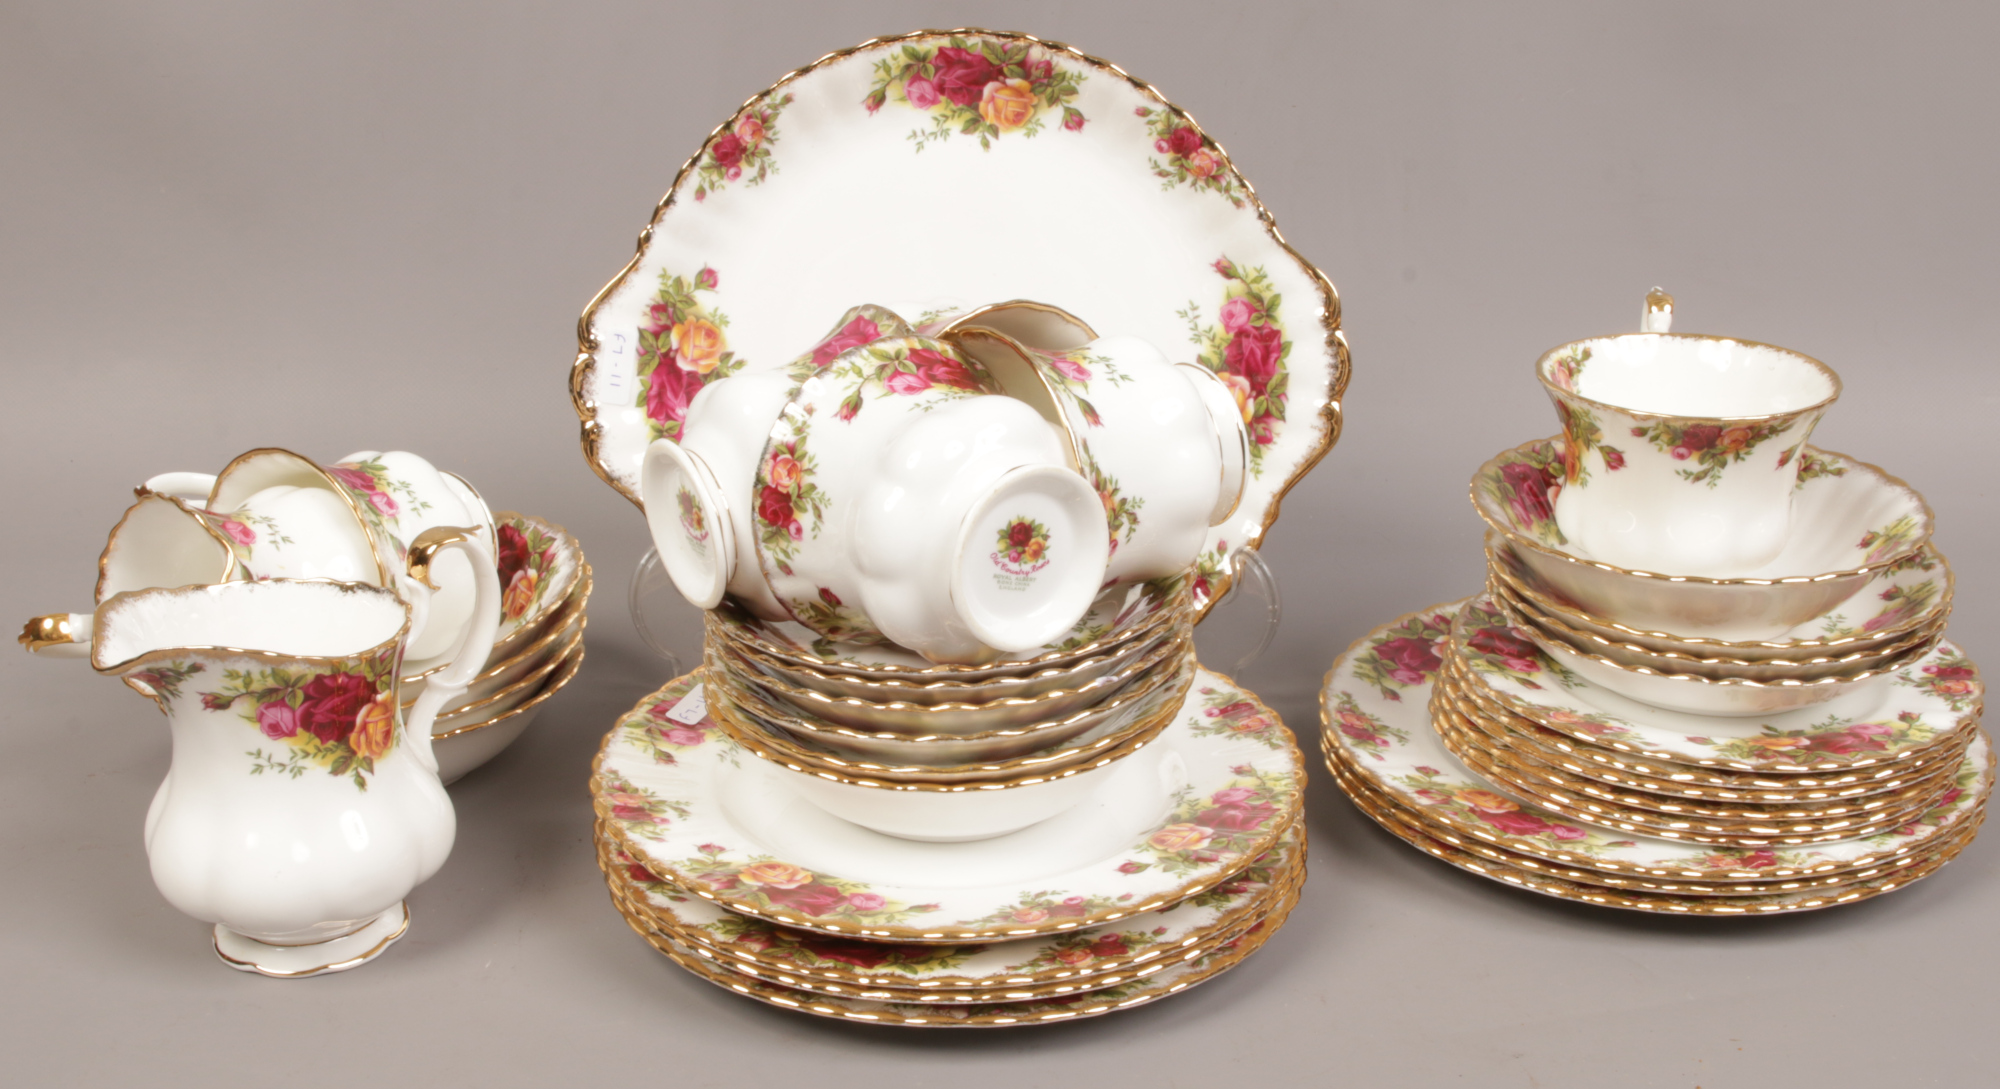 A quantity of Royal Albert Old Country Roses tea wares to include cake stand, cup and saucers, cream